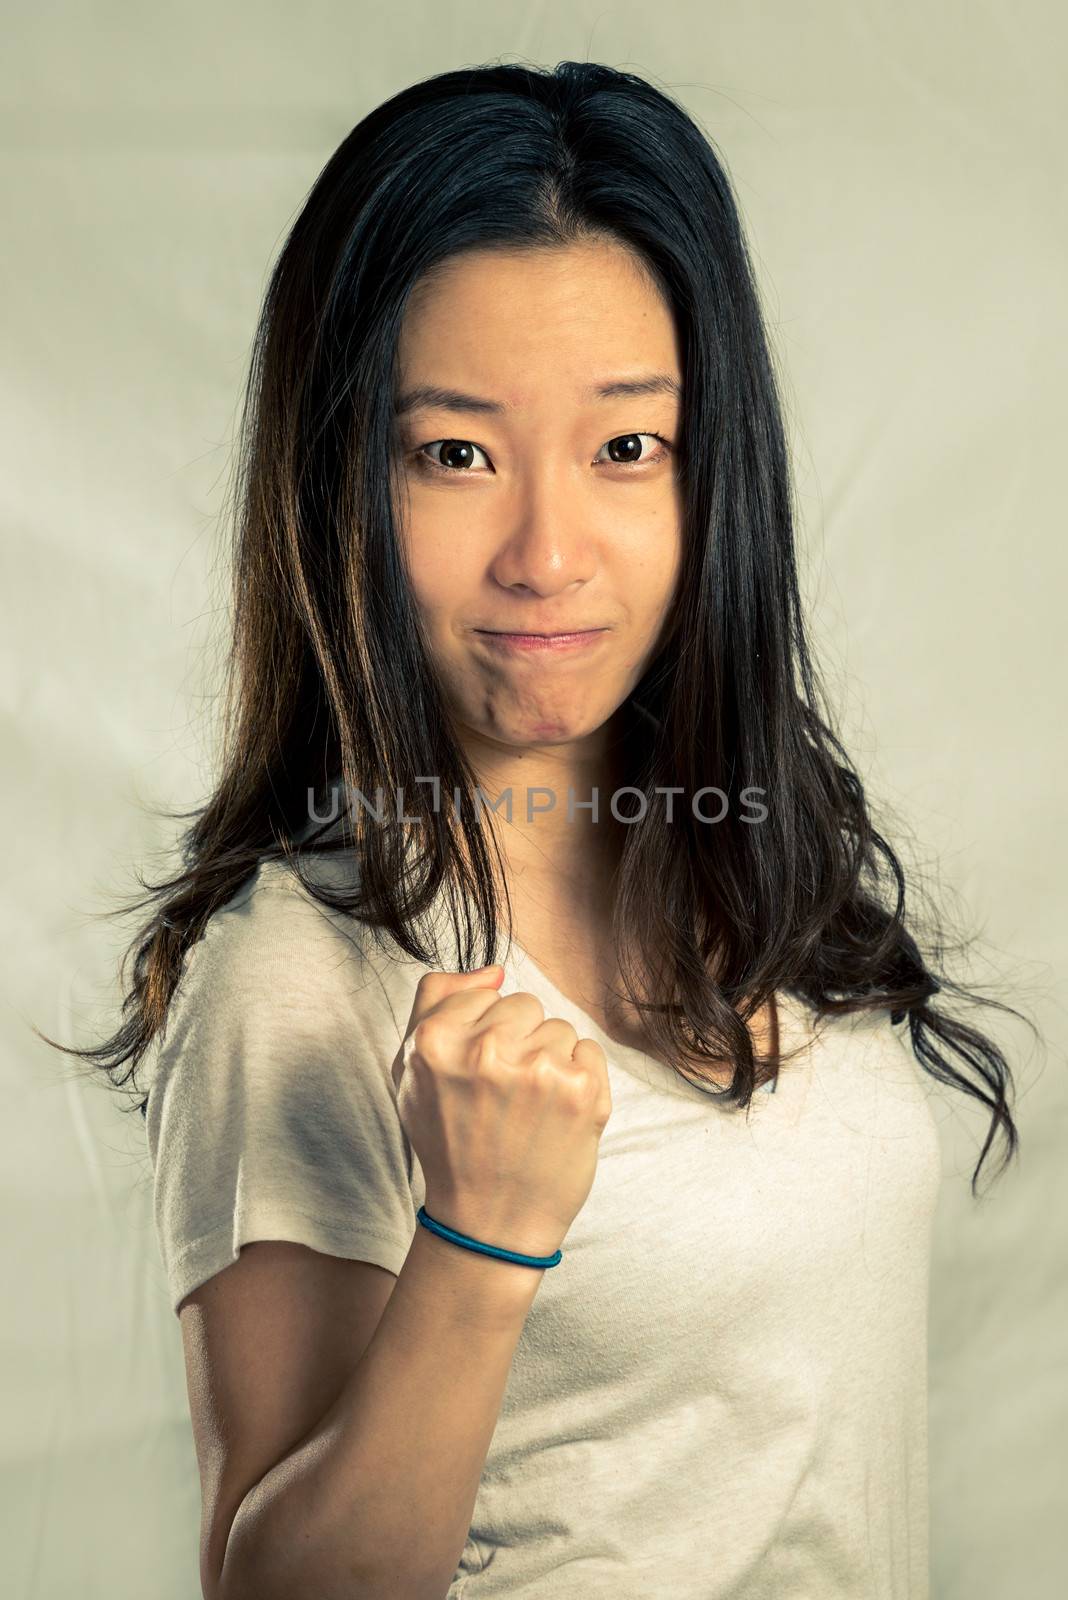 Young woman clenching her fist for encouragement, with fashion tone and background